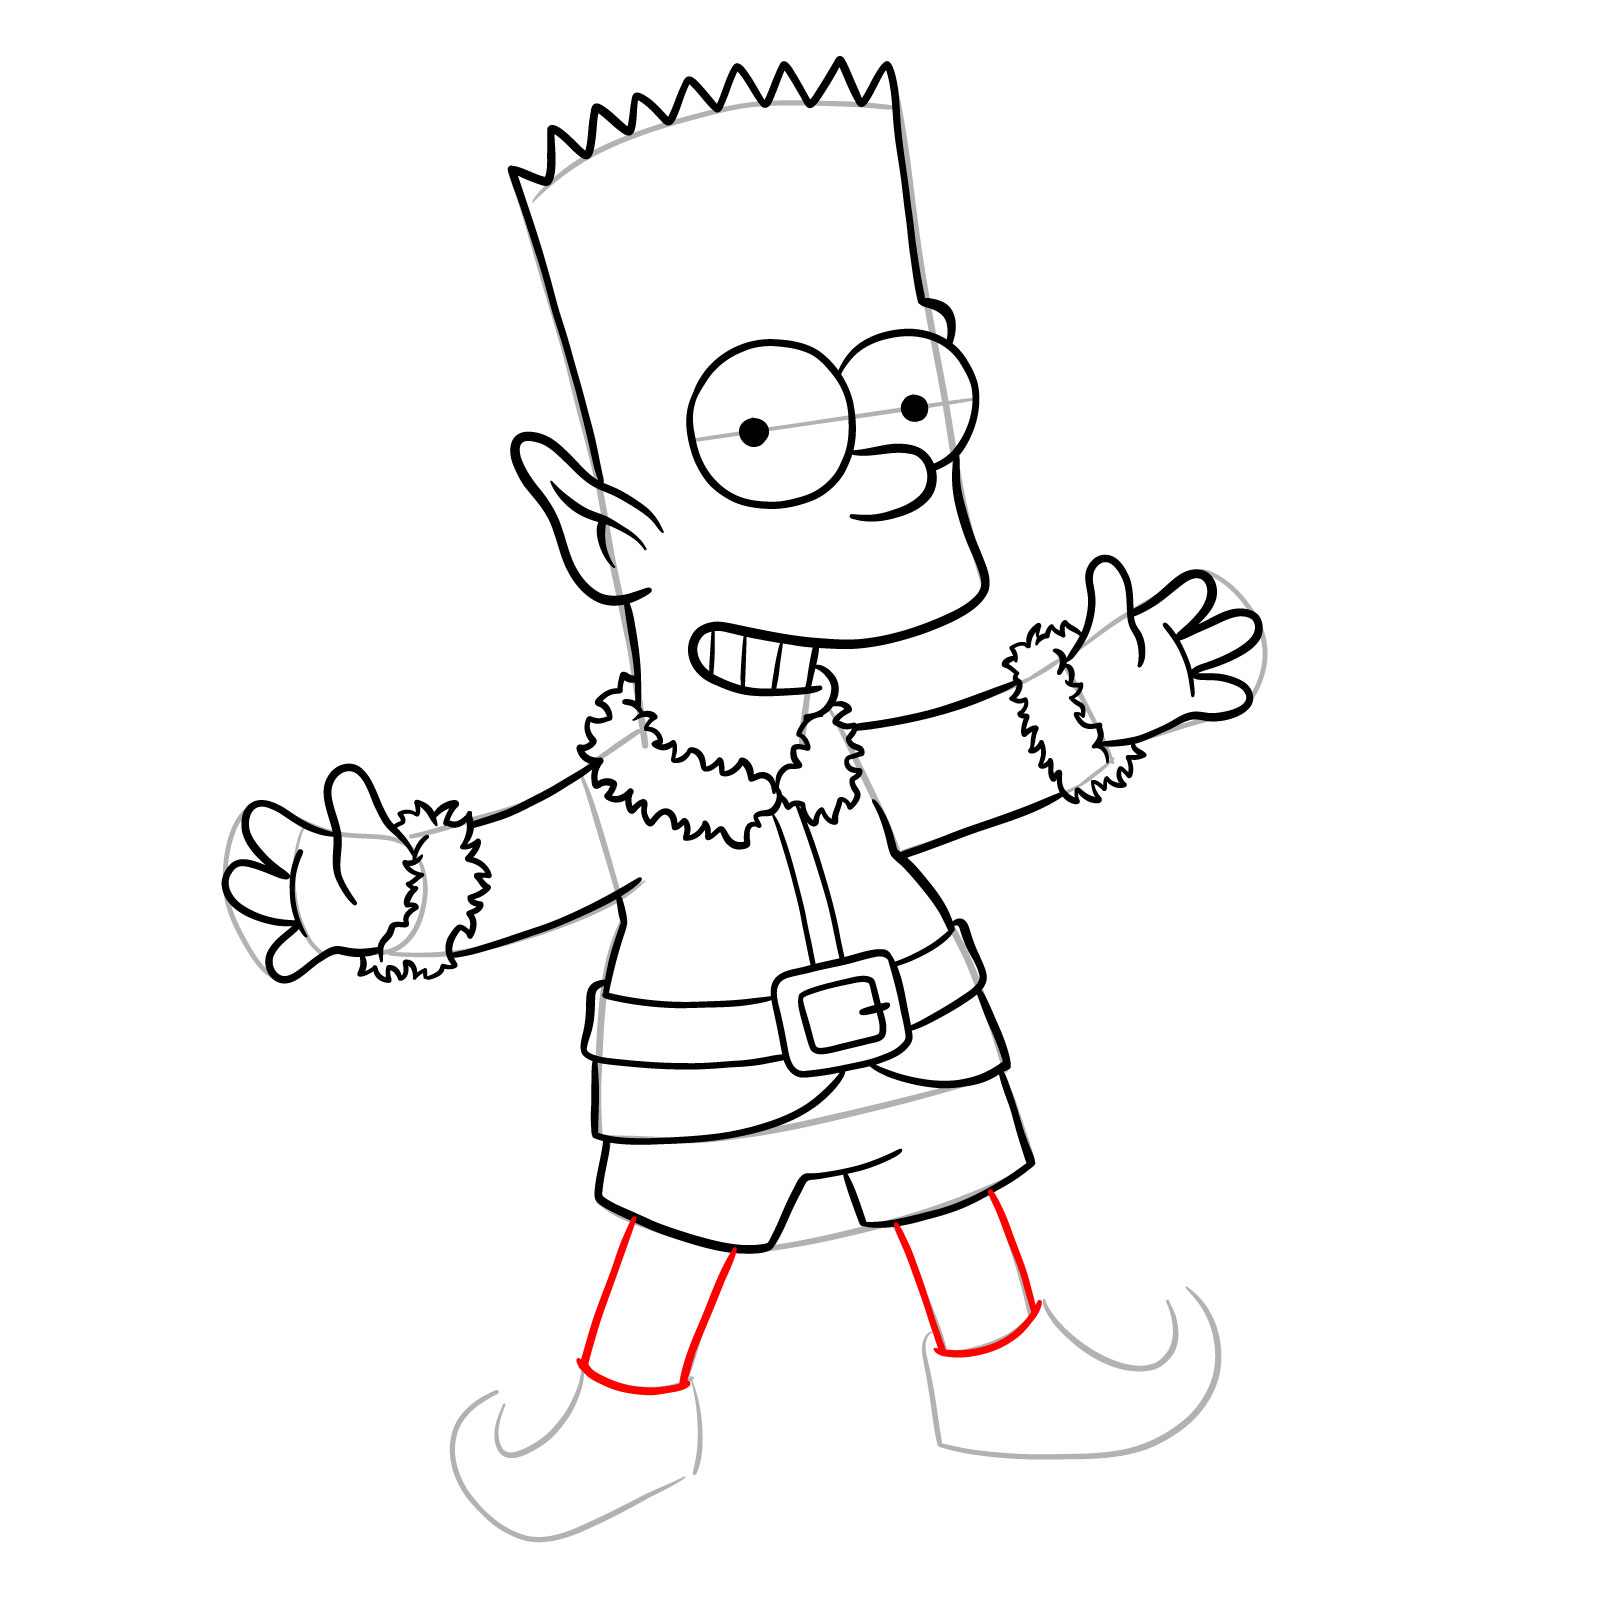 How to draw Bart Simpson as a Christmas Elf - step 26